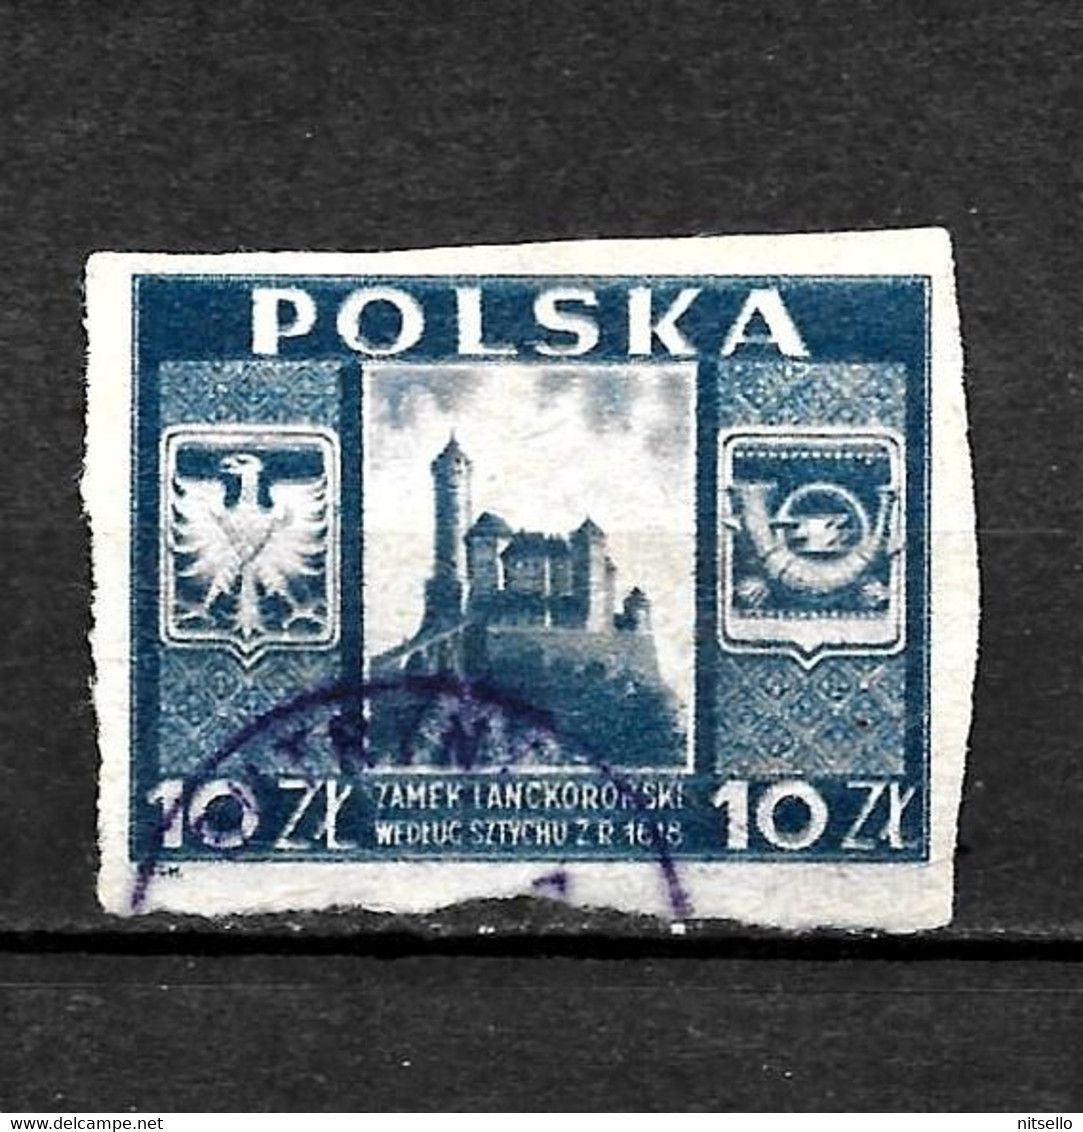 LOTE 1787 A  ///   POLONIA   YVERT Nº: 476      ¡¡¡ OFERTA - LIQUIDATION - JE LIQUIDE !!! - Used Stamps